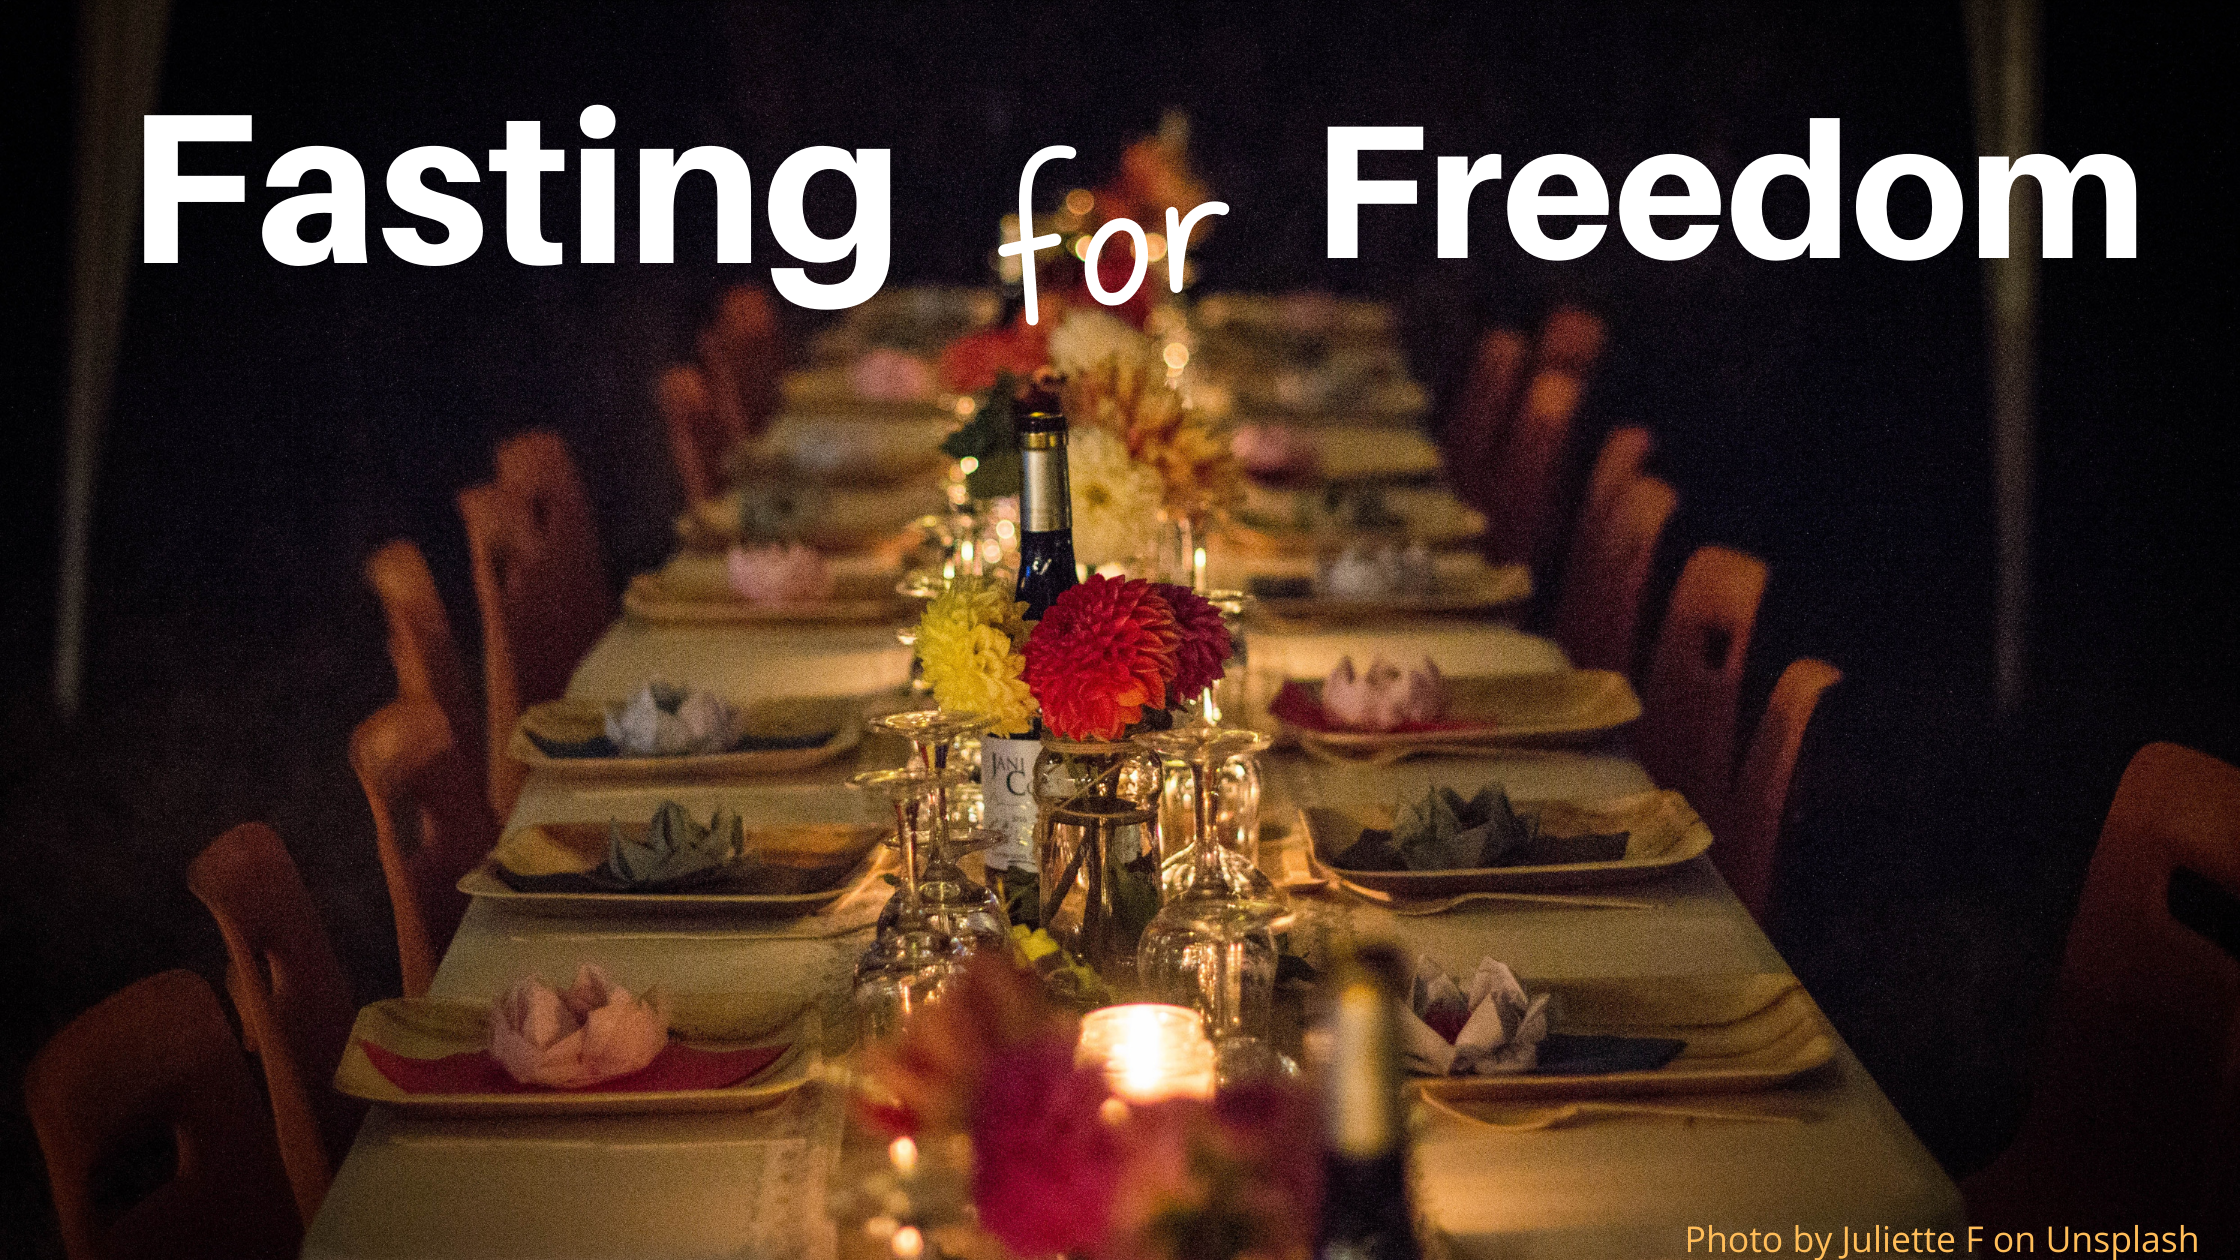 Fasting for Freedom